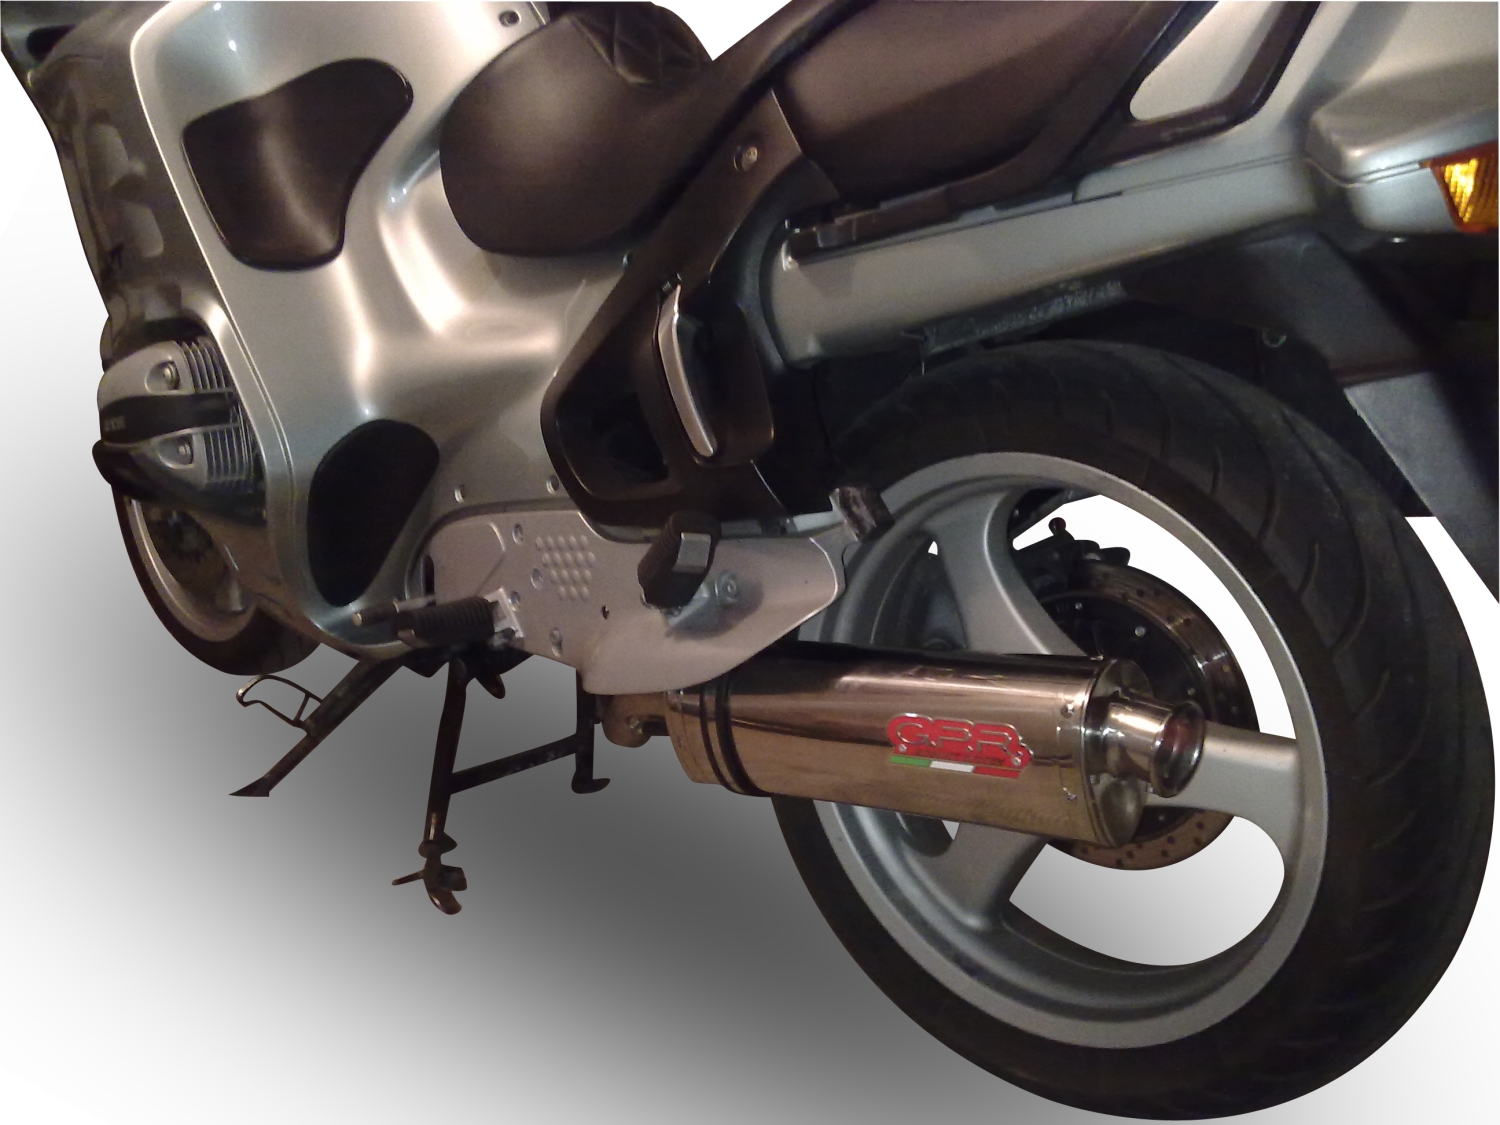 Exhaust system compatible with Bmw R 1100 Gs - R- RT 1994-1998, Trioval, Homologated legal slip-on exhaust including removable db killer, link pipe and catalyst 